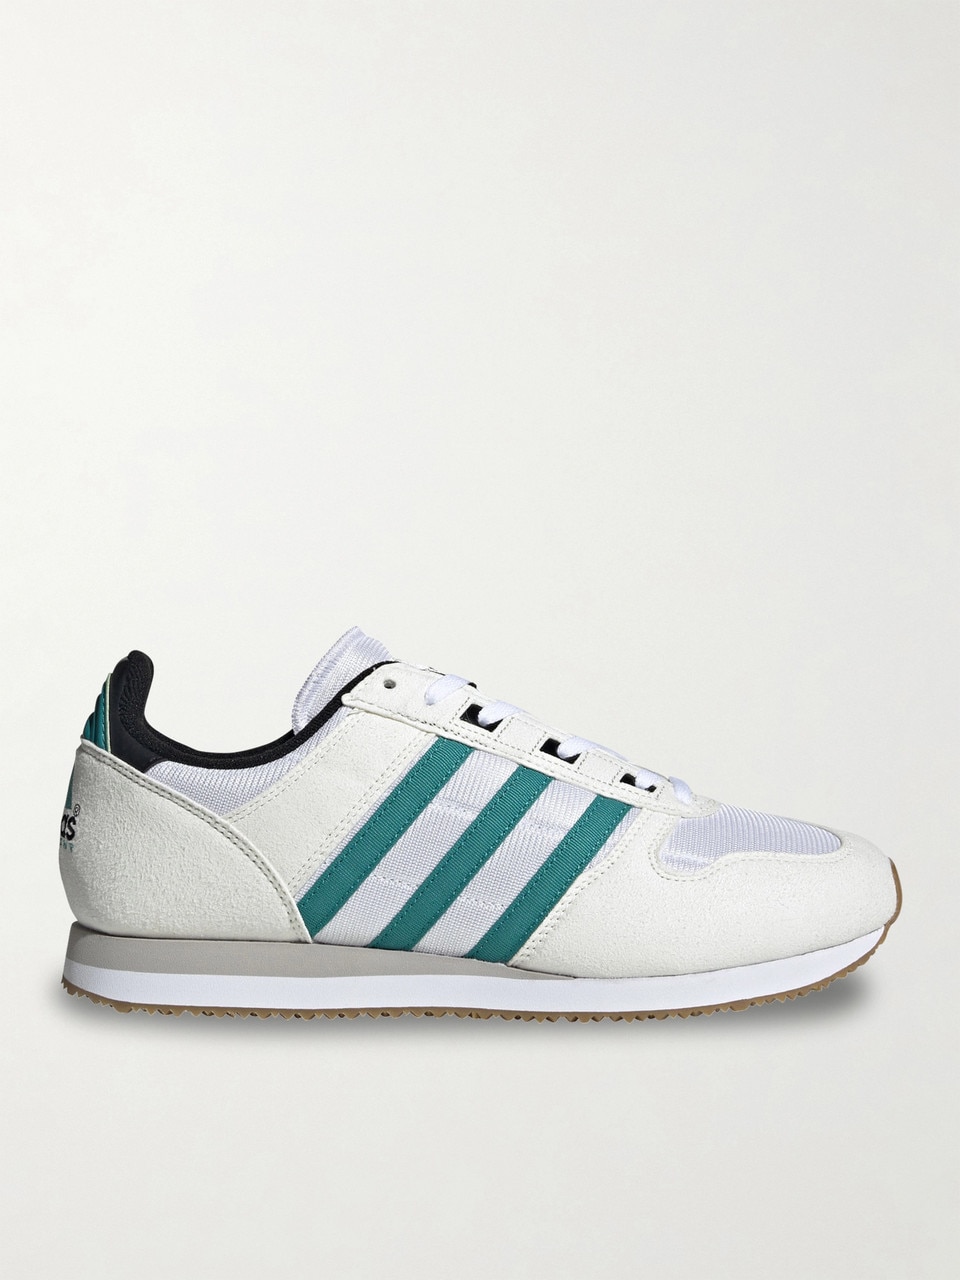 Fashion: Sneaker Icon: Celebrating 30 Years Of Adidas EQT | The Journal |  MR PORTER